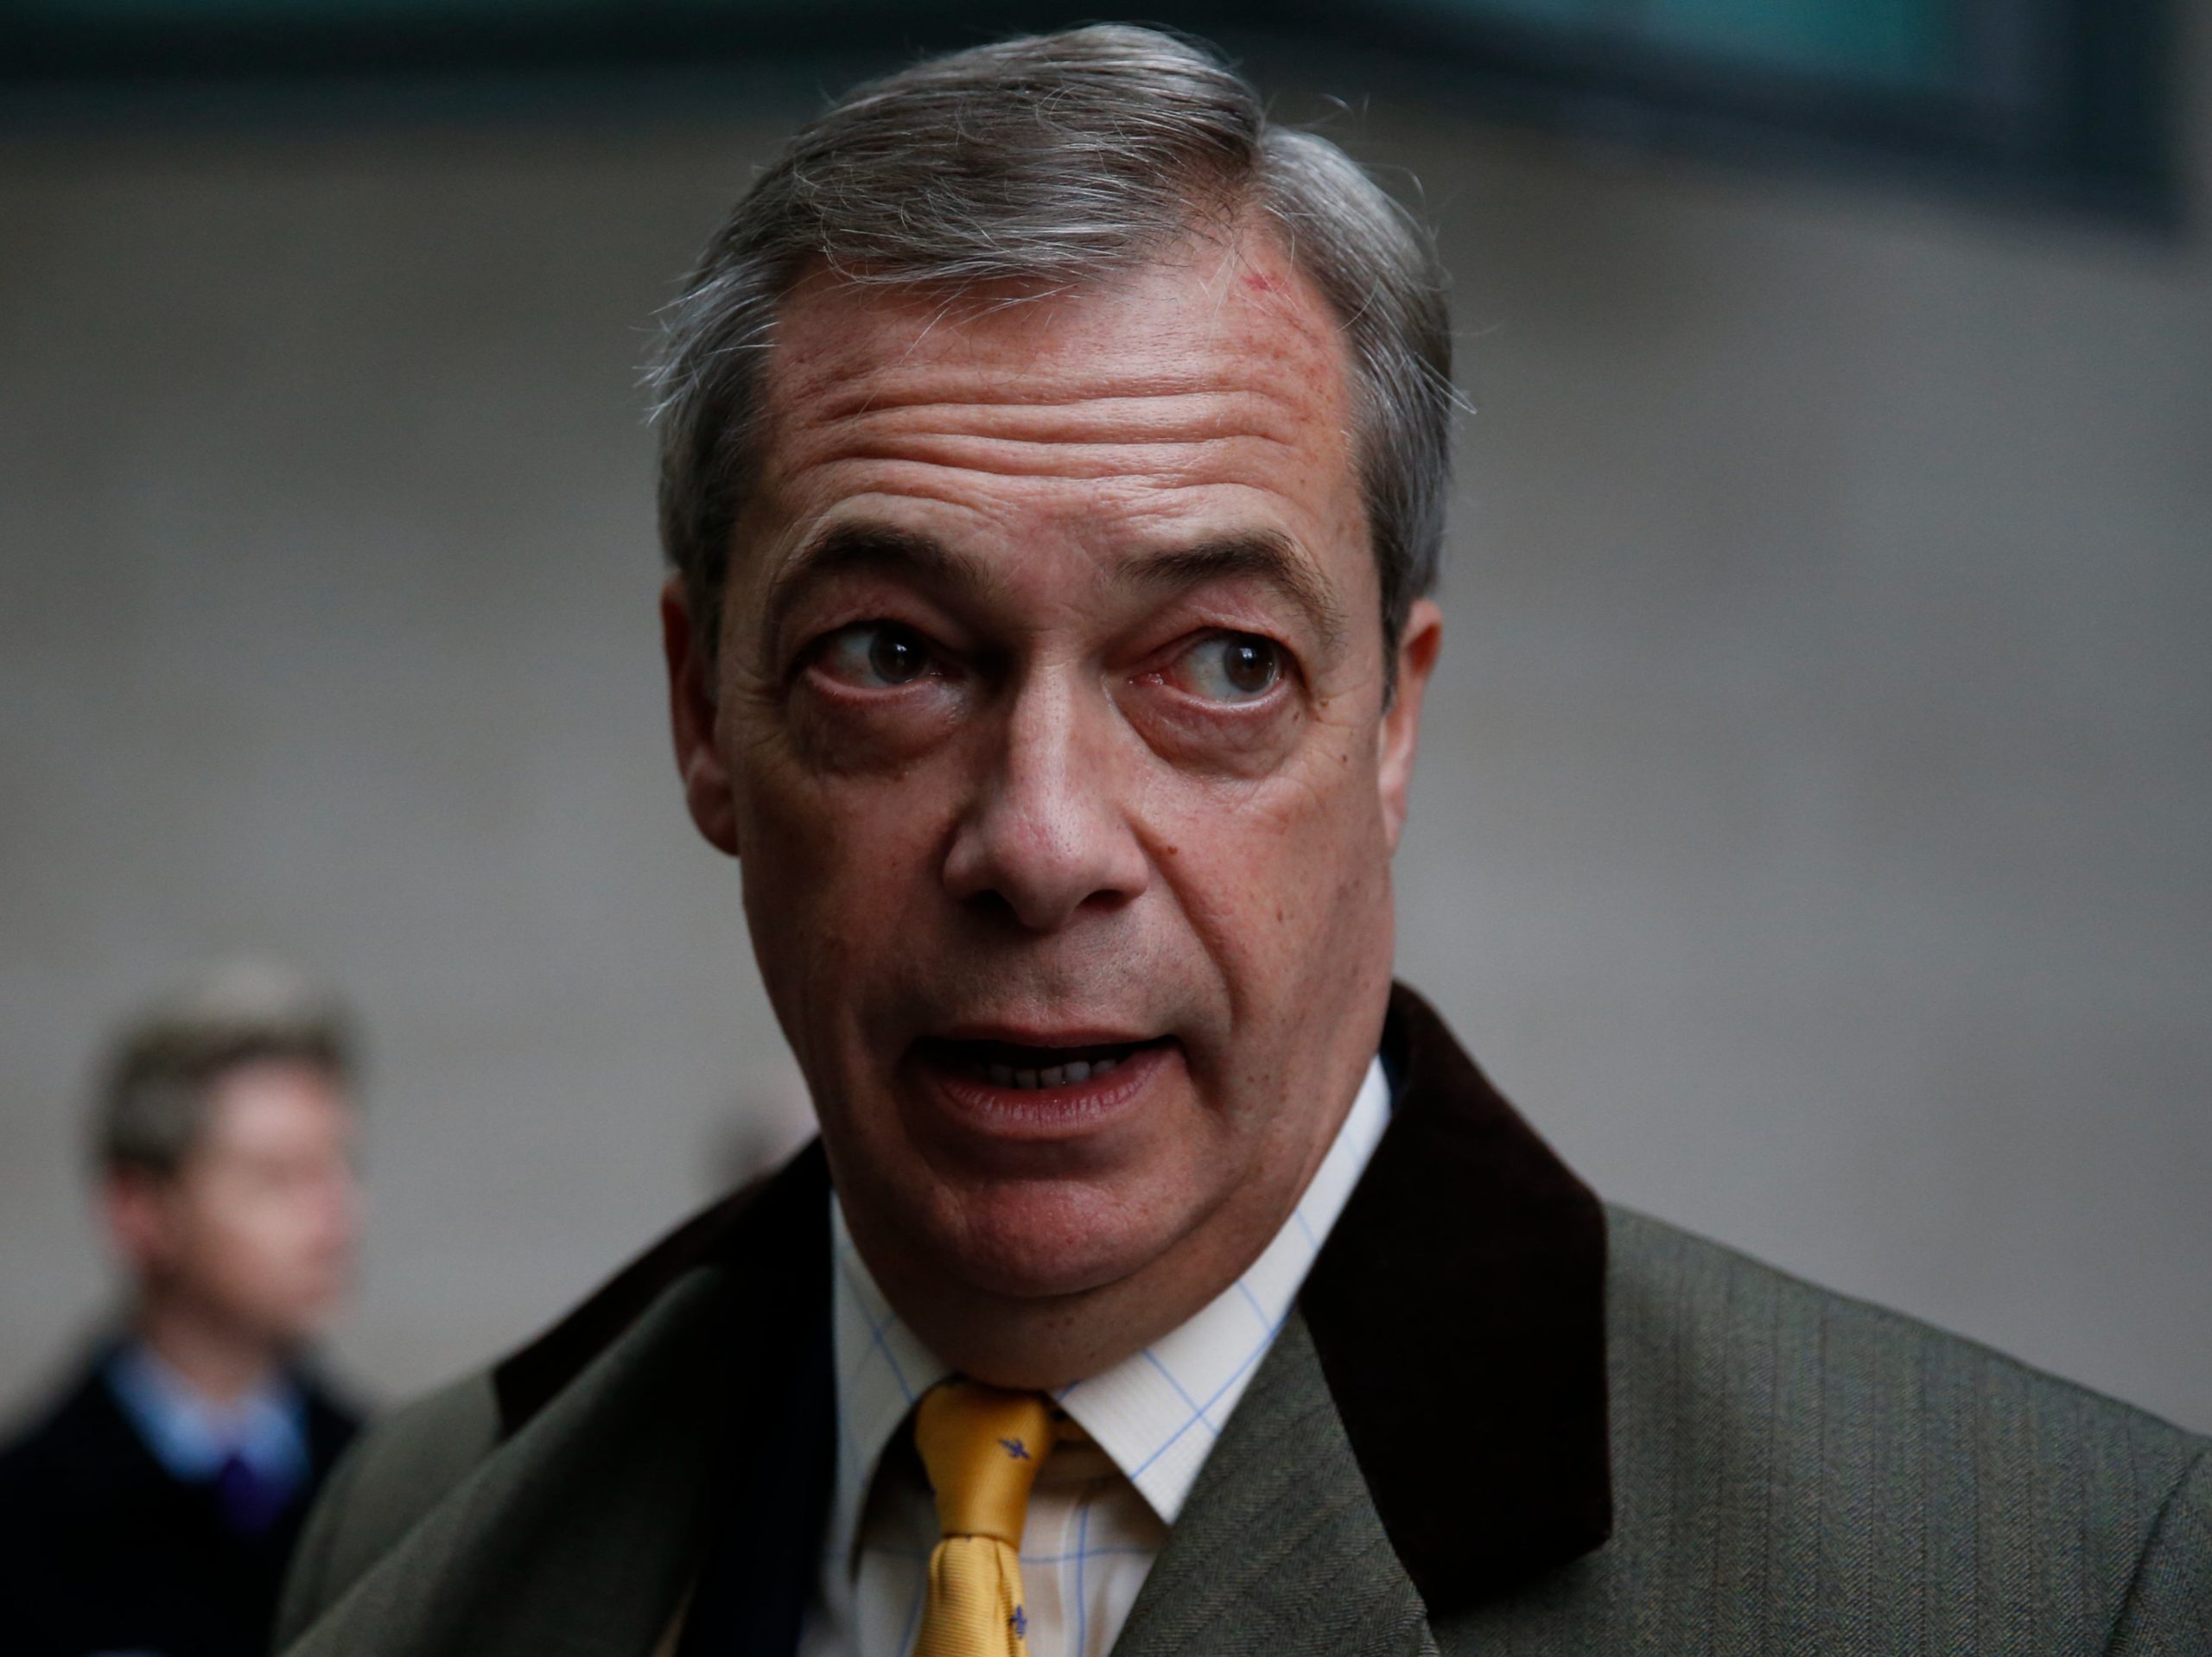 Nigel Farage mercilessly mocked for moaning about Australia ‘controlling its border’